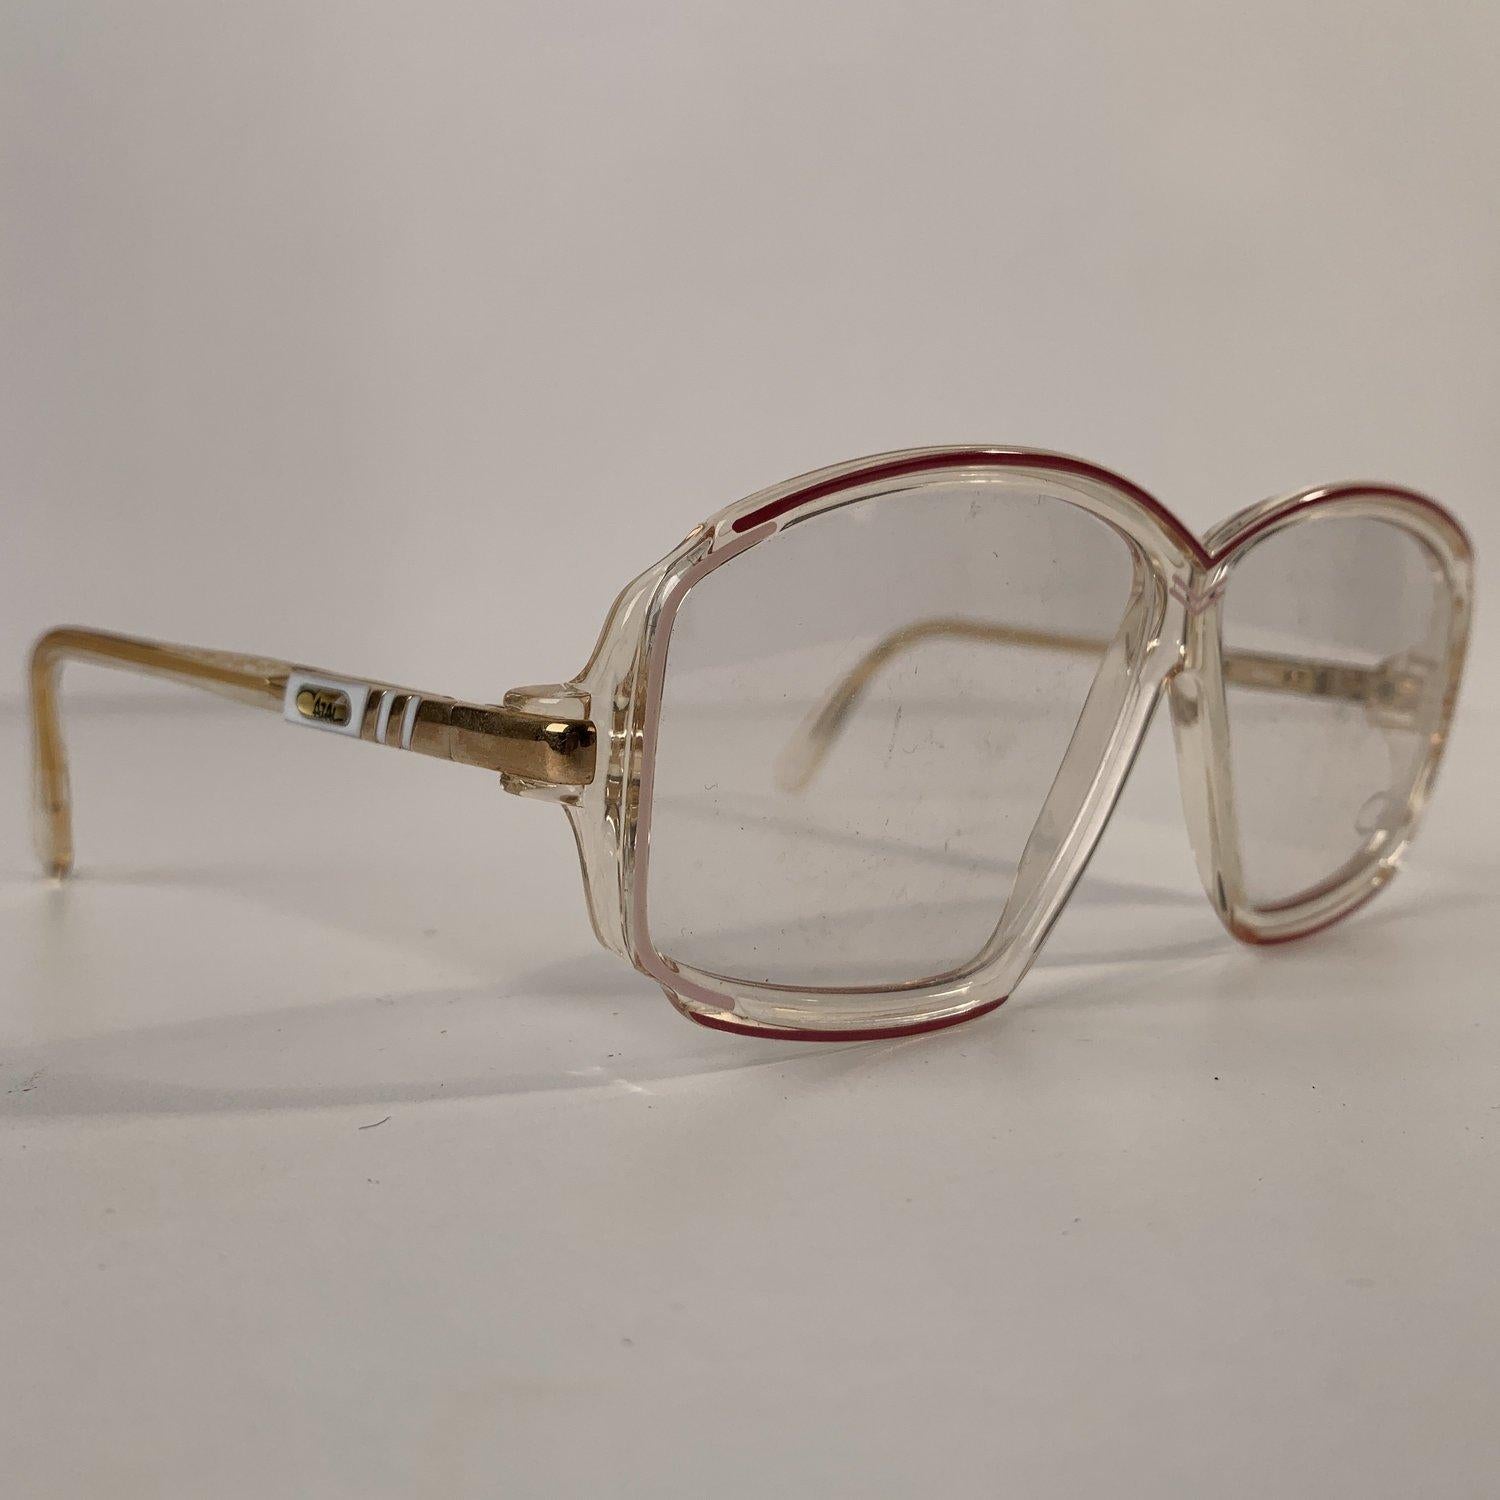 Cazal Vintage Unisex Eyeglasses Mod 153 Col 168 59mm West Germany In Excellent Condition For Sale In Rome, Rome